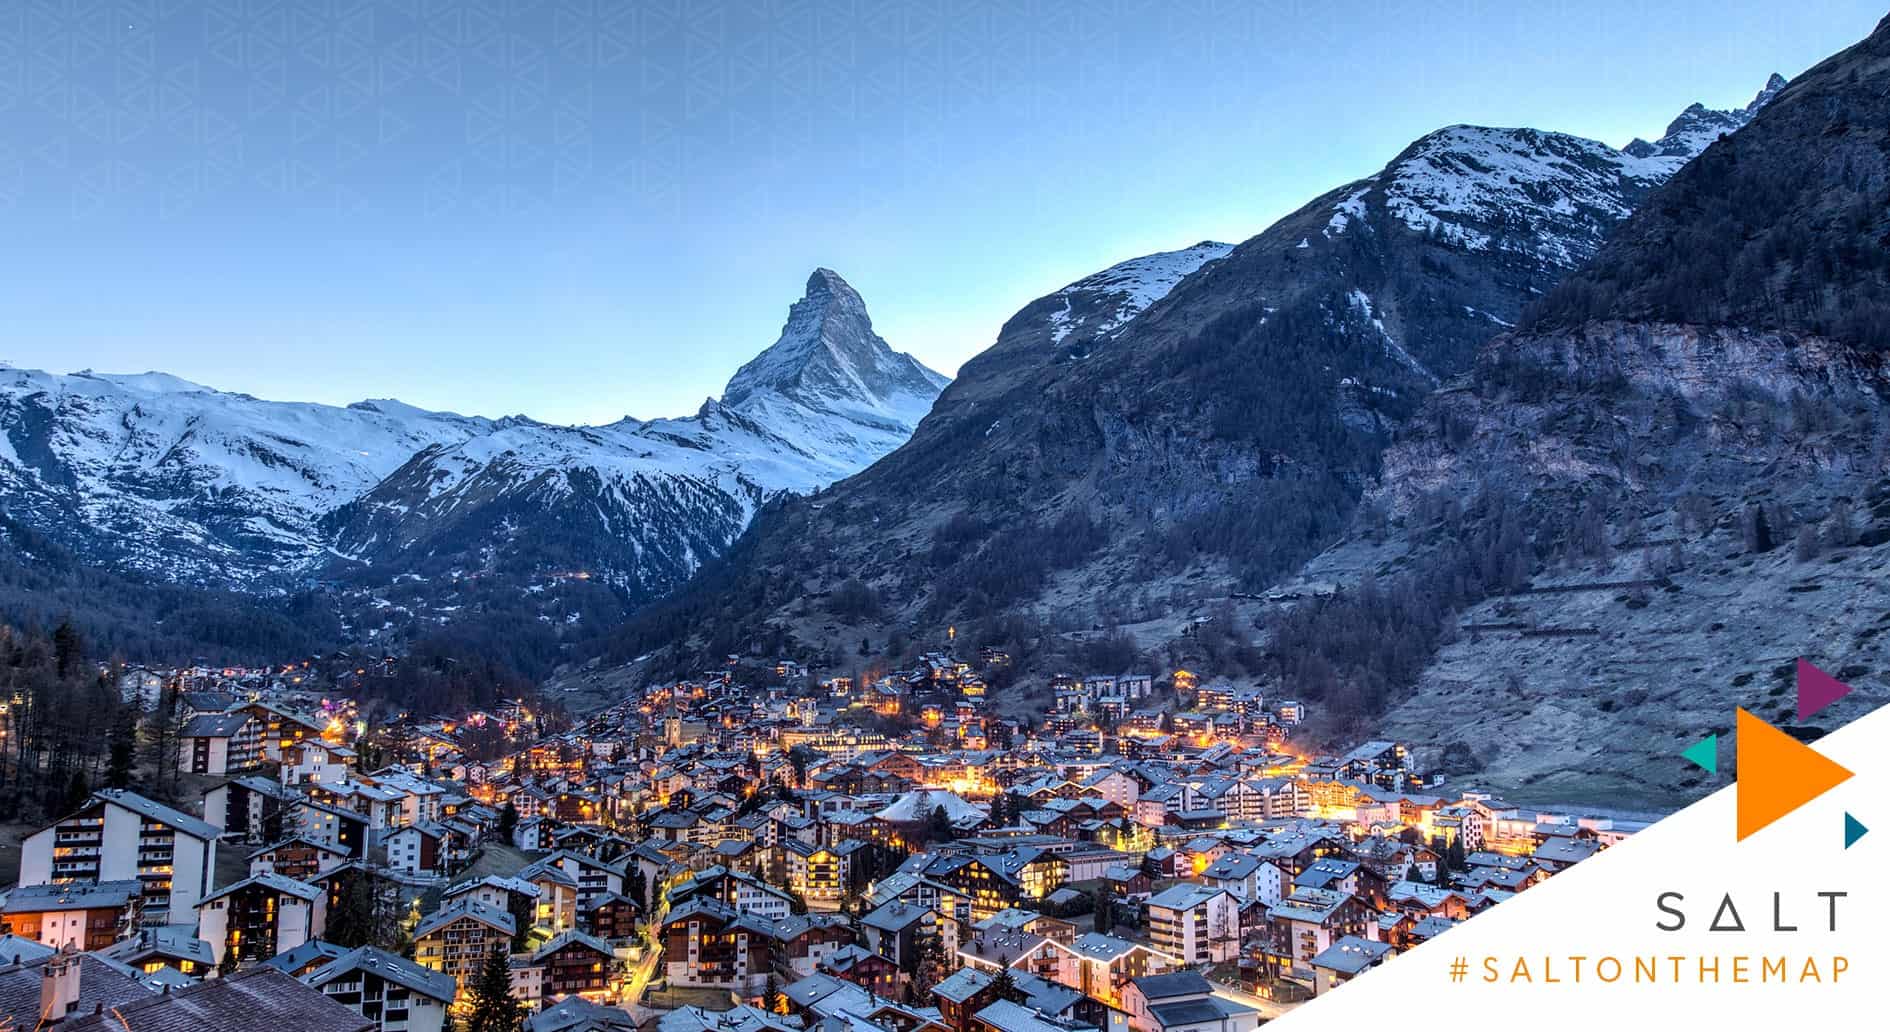 Town of Davos, Switzerland where SALT attended Davos 2019 conference